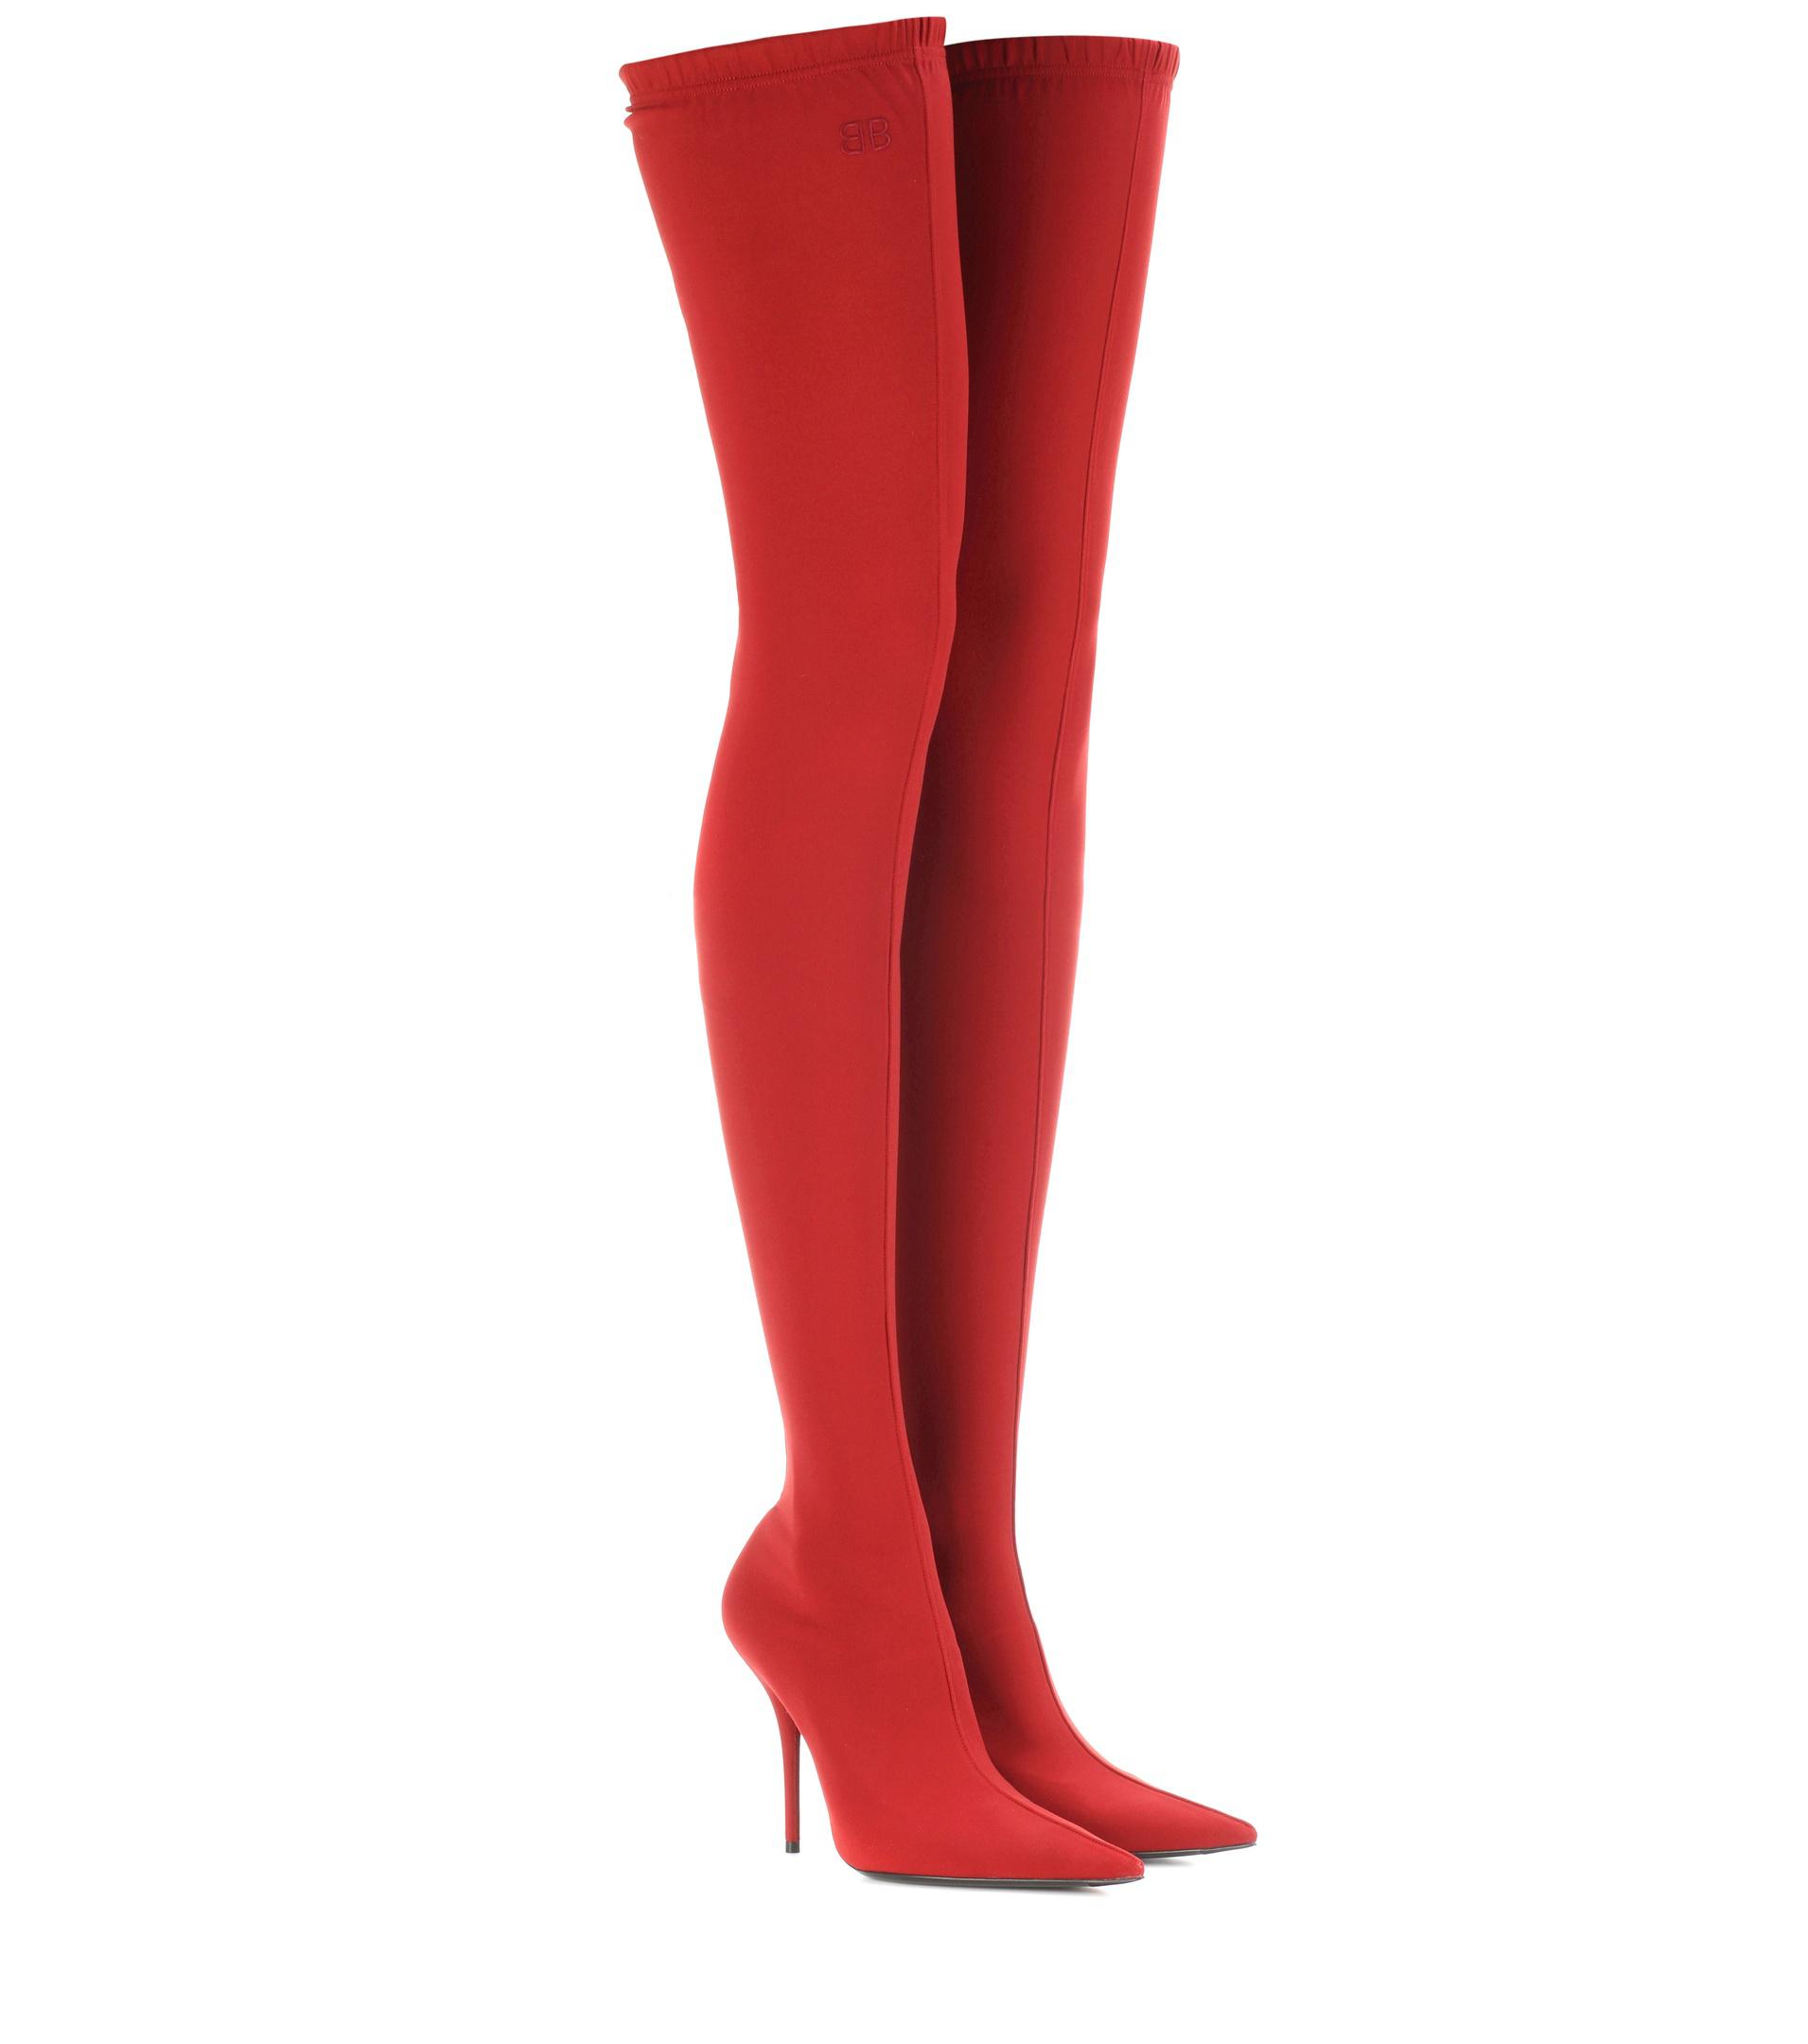 Balenciaga Knife Over-the-knee Boots in Red | Lyst